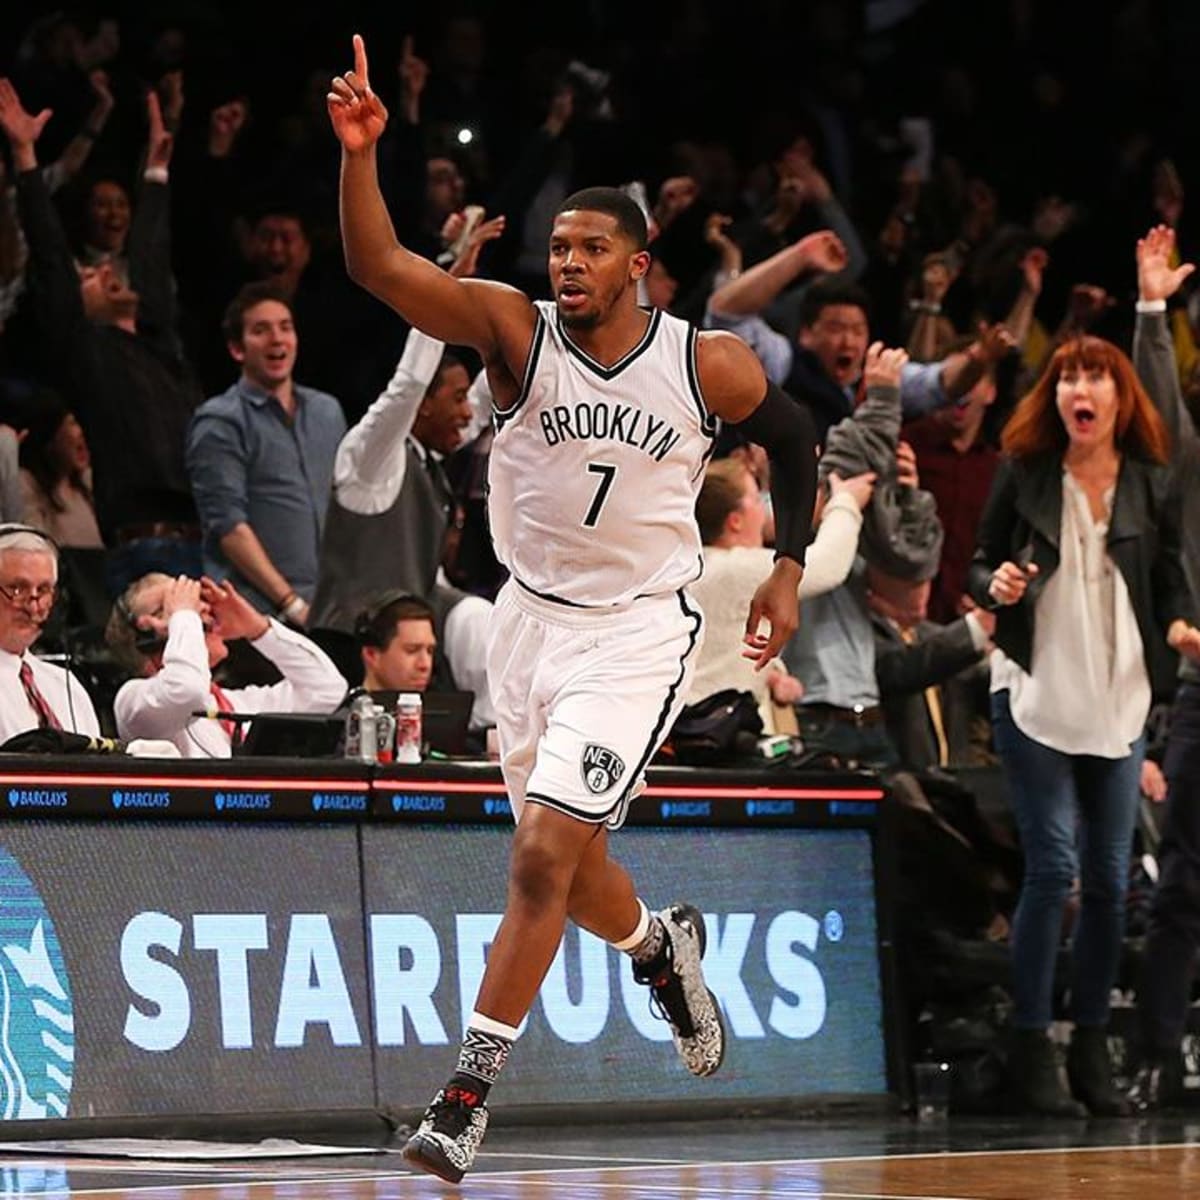 Miami Heat: Joe Johnson plays Nets for first time since buyout